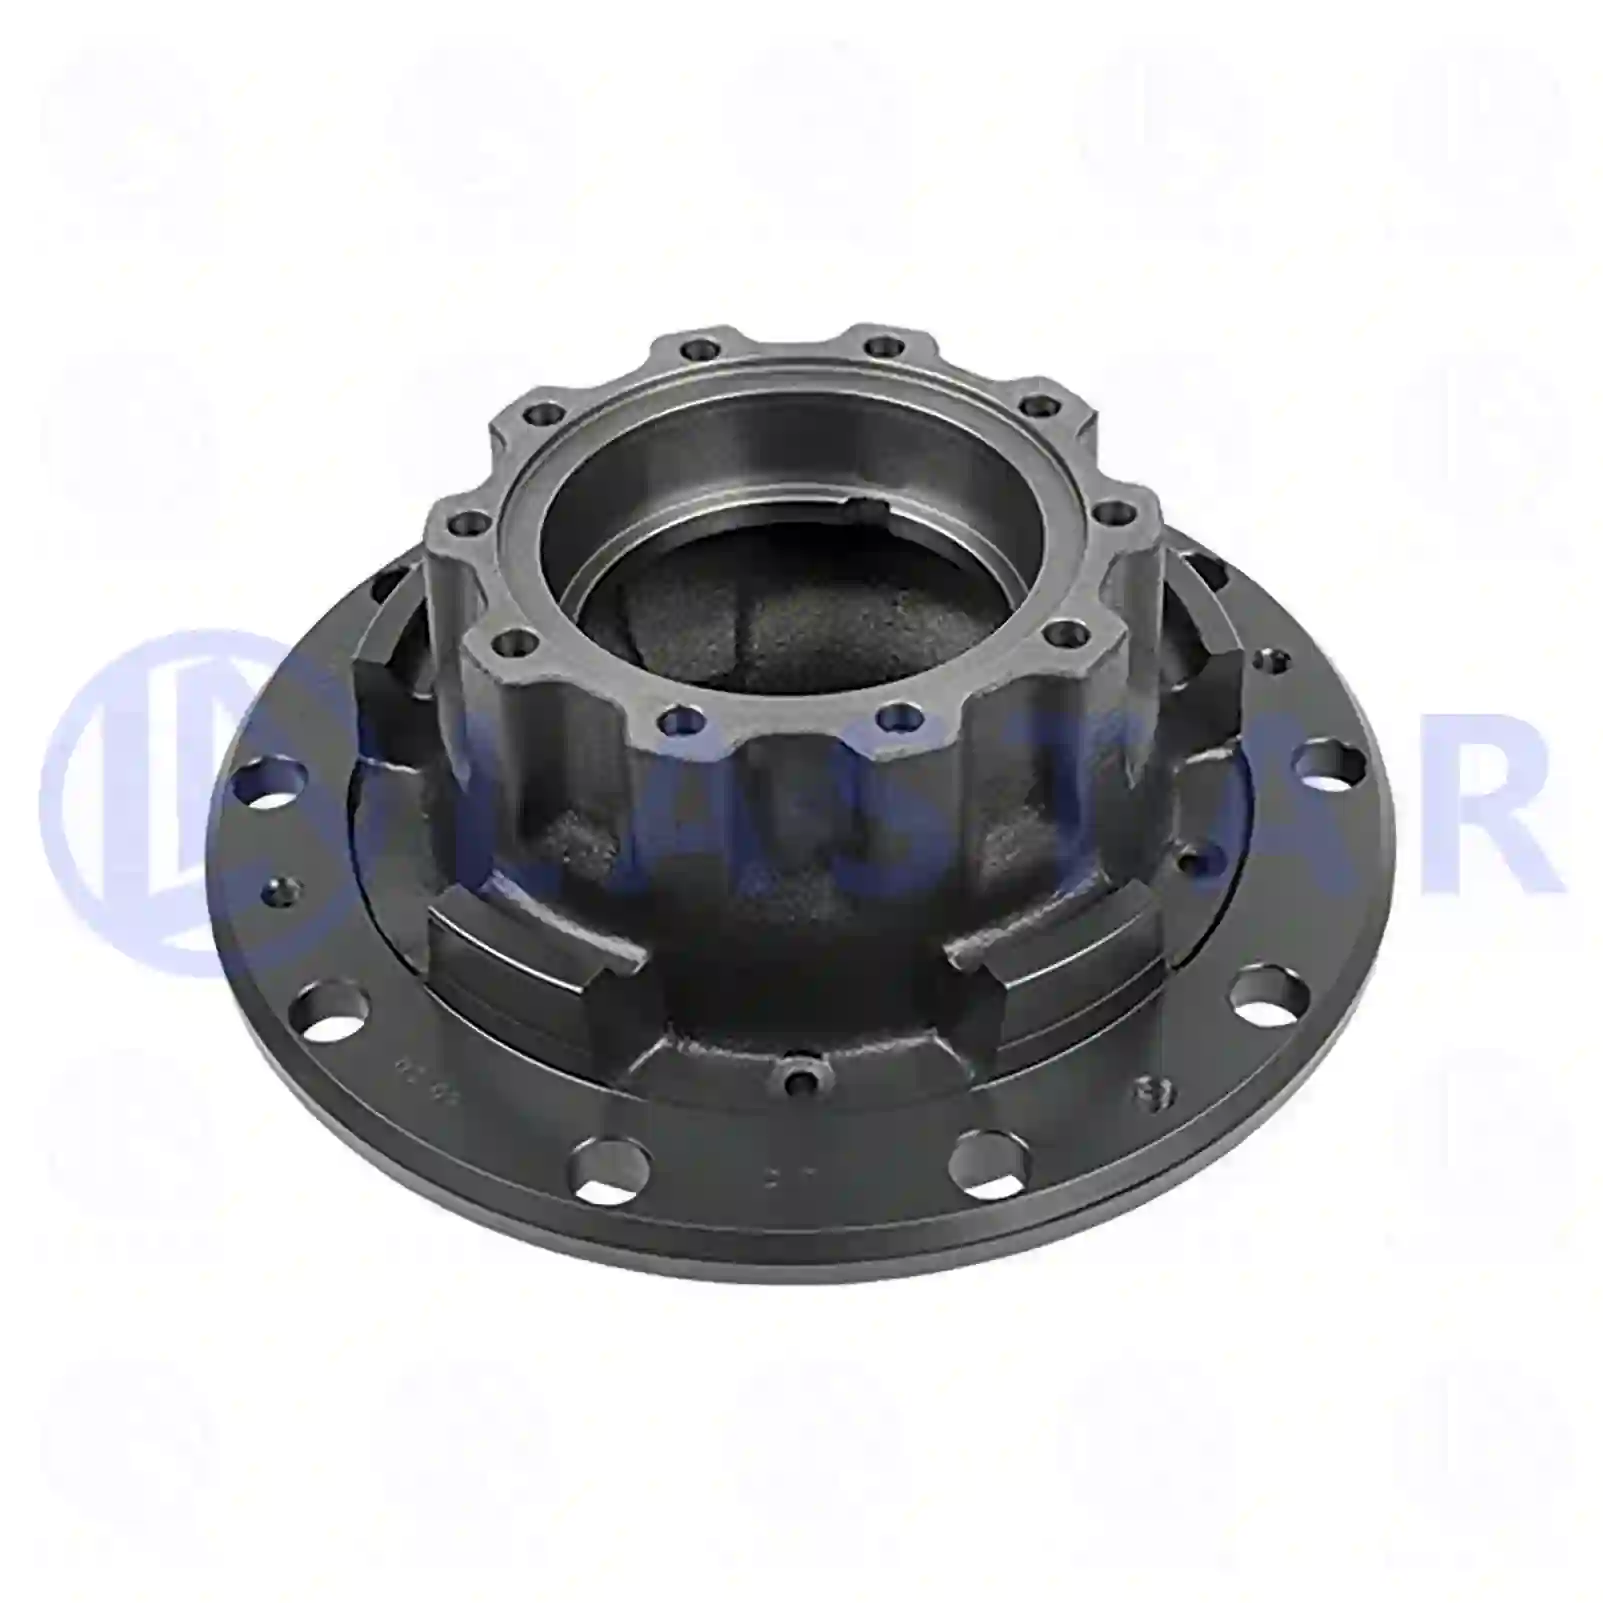 Wheel hub, without bearings, 77726953, 1724788, ZG30223-0008, , , , , ||  77726953 Lastar Spare Part | Truck Spare Parts, Auotomotive Spare Parts Wheel hub, without bearings, 77726953, 1724788, ZG30223-0008, , , , , ||  77726953 Lastar Spare Part | Truck Spare Parts, Auotomotive Spare Parts